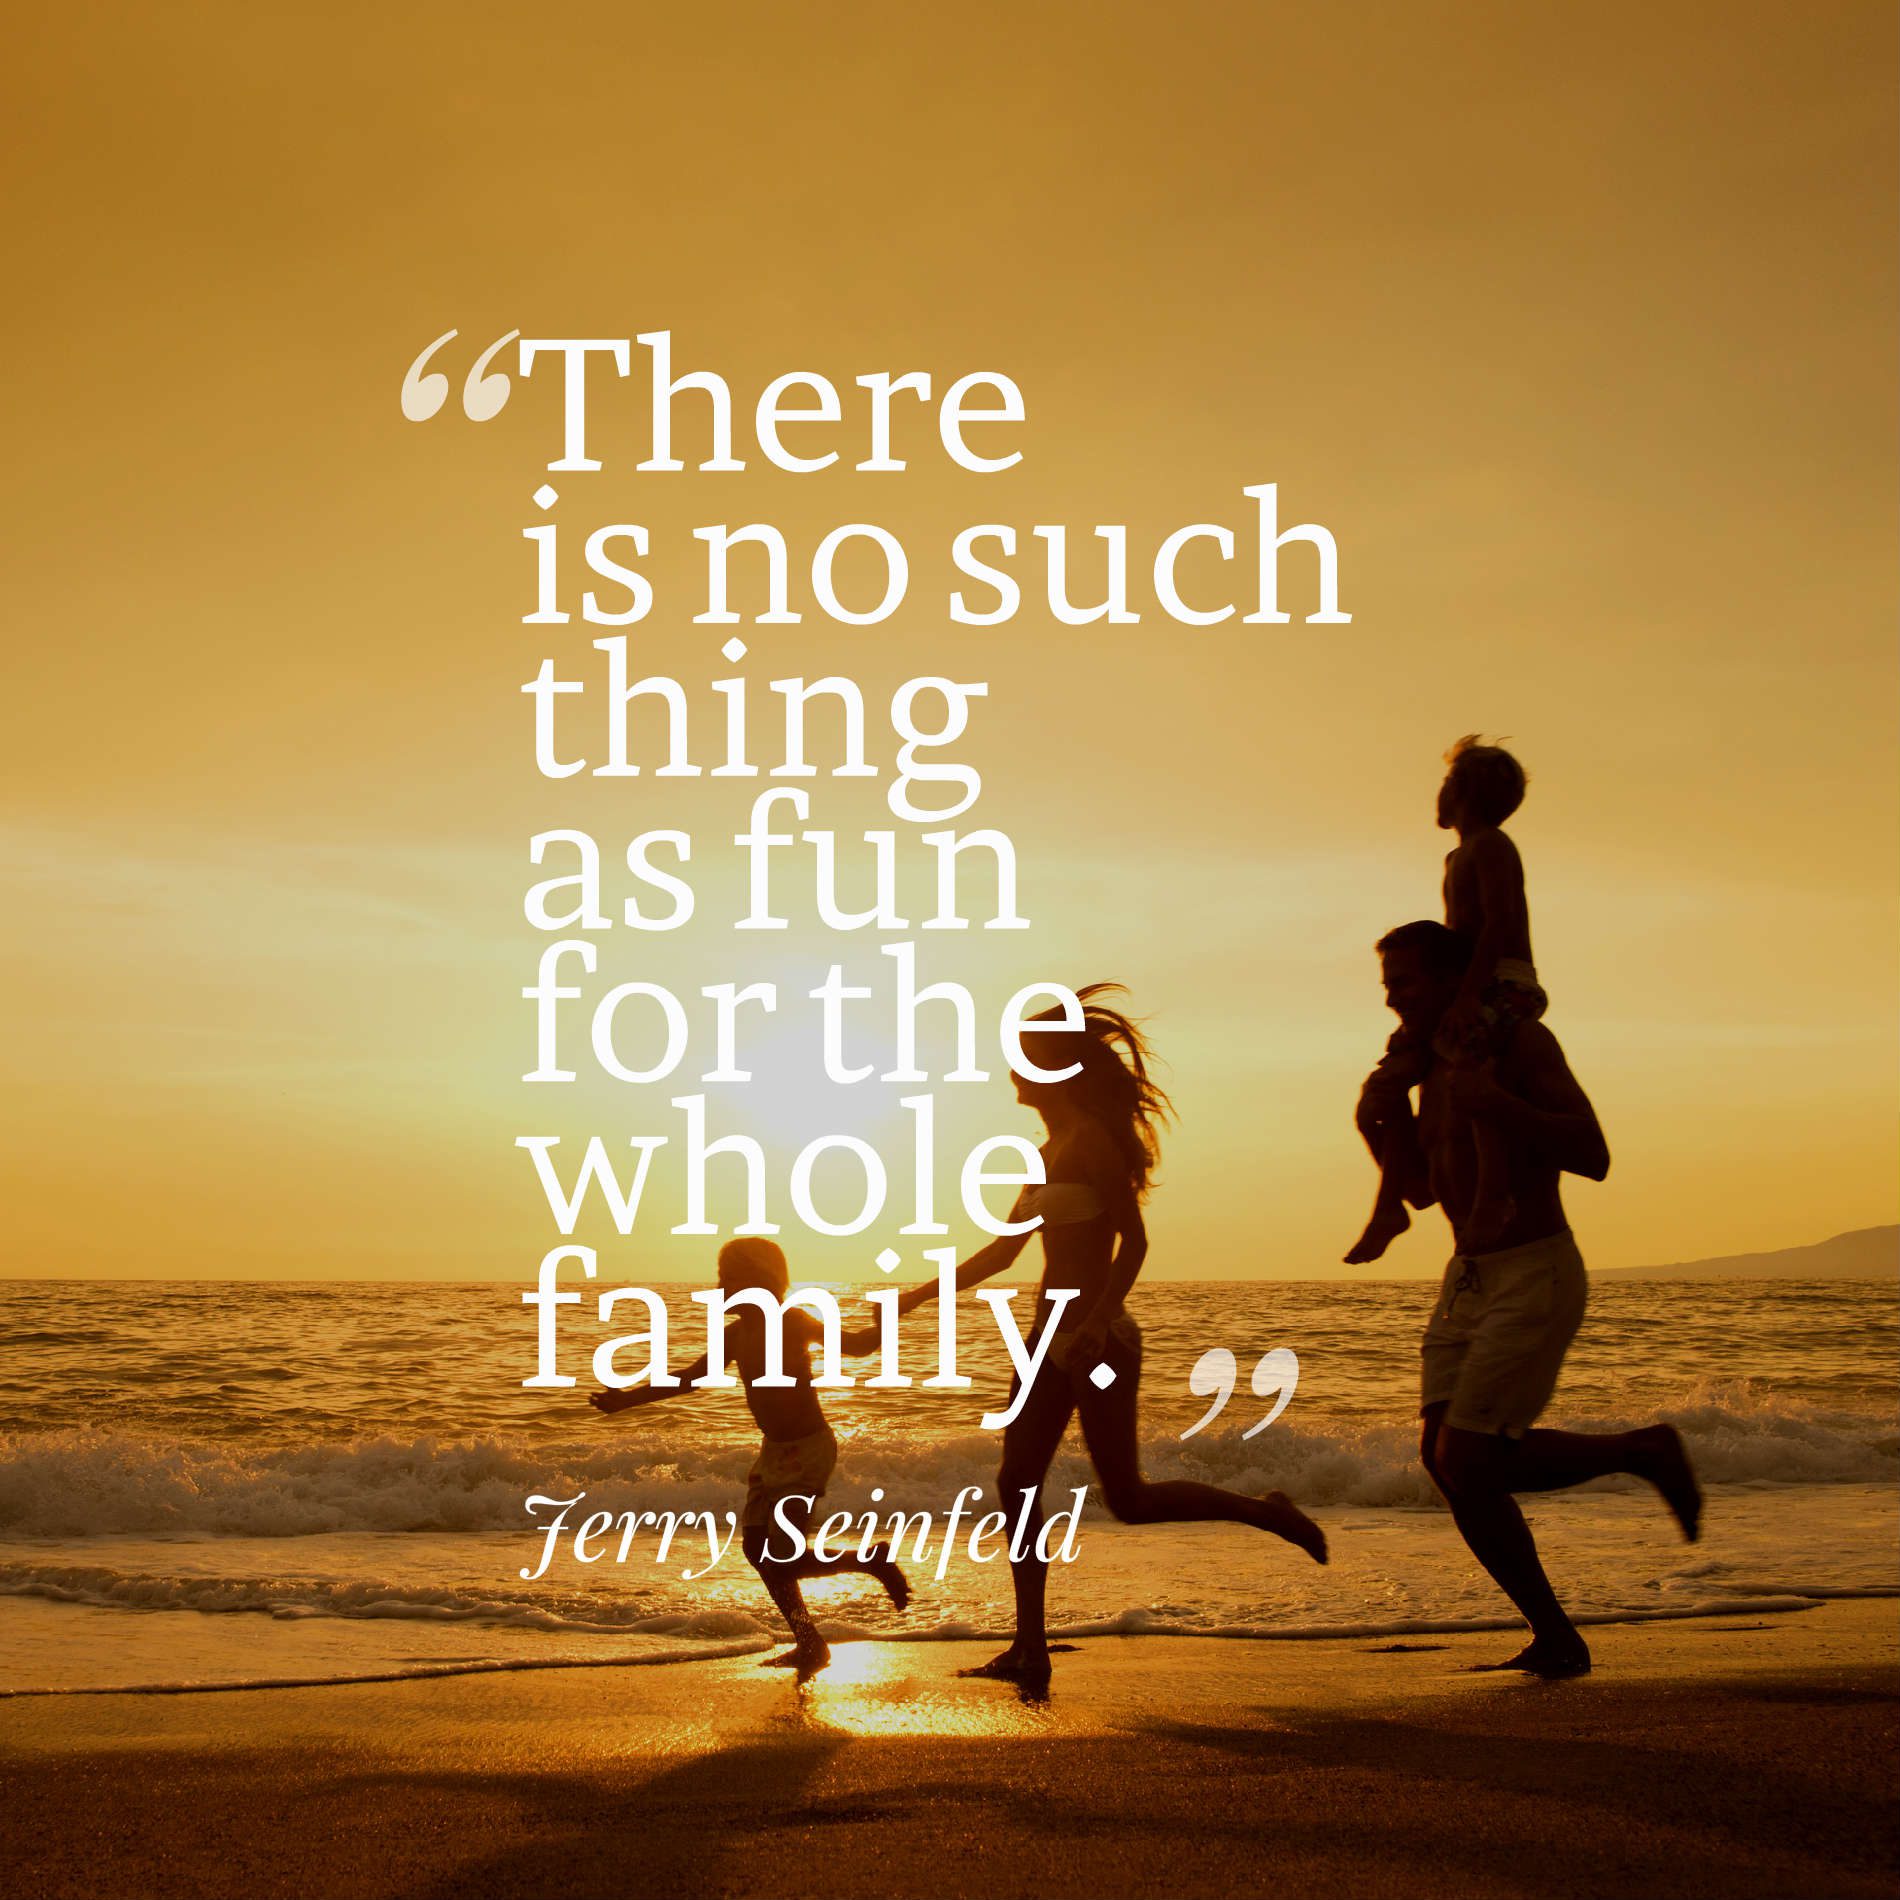 There is no such thing as fun for the whole family.